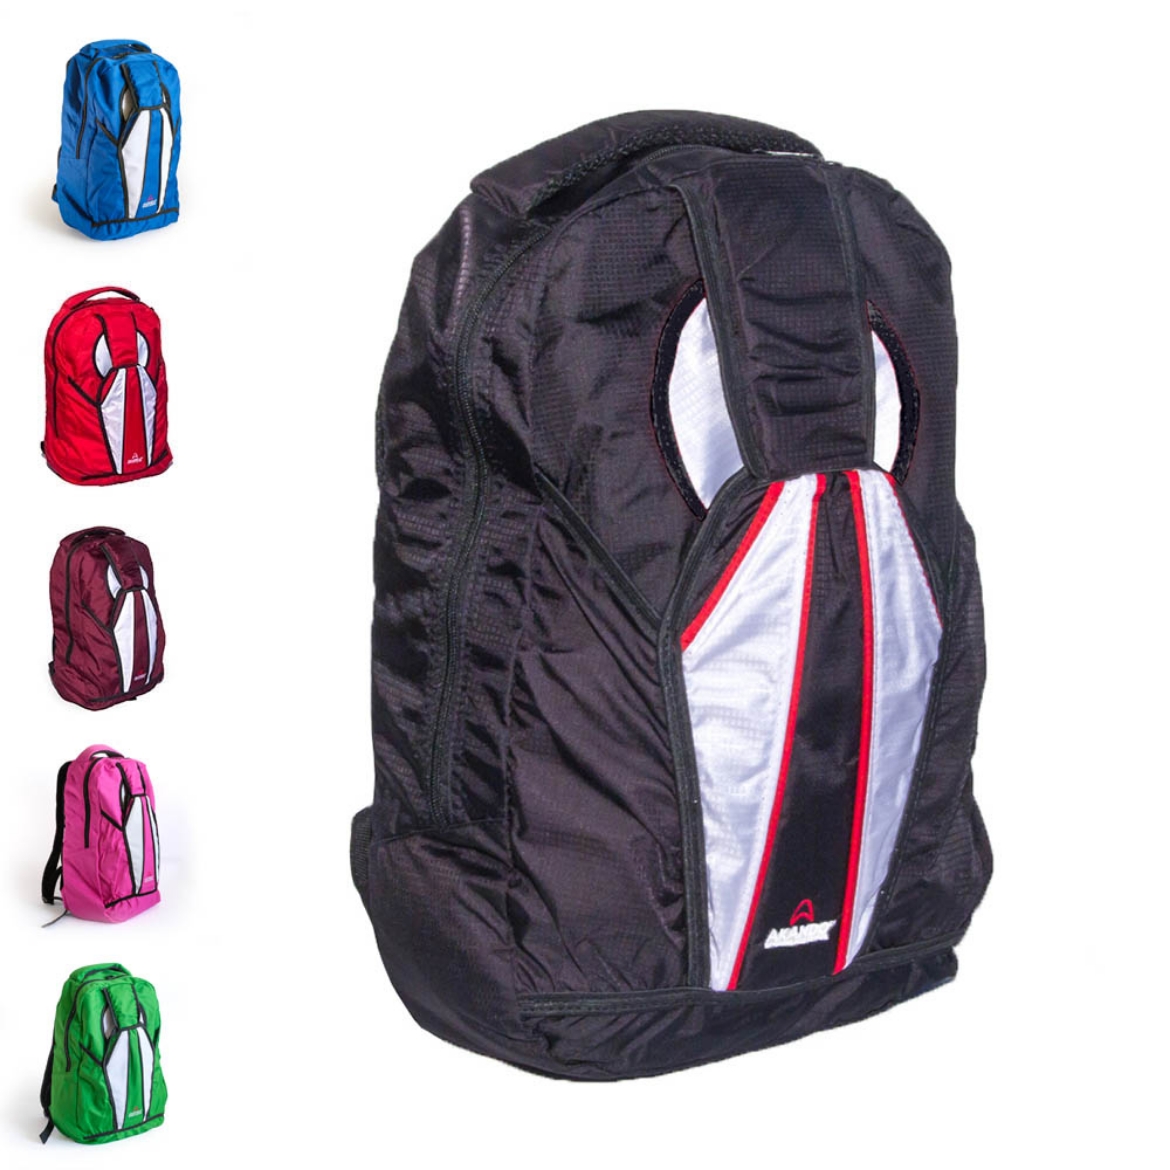 Van samfund Farvel Parachute backpack. Skydiving accessories -AKANDO - gloves, goggles,  gearbags and accessories.